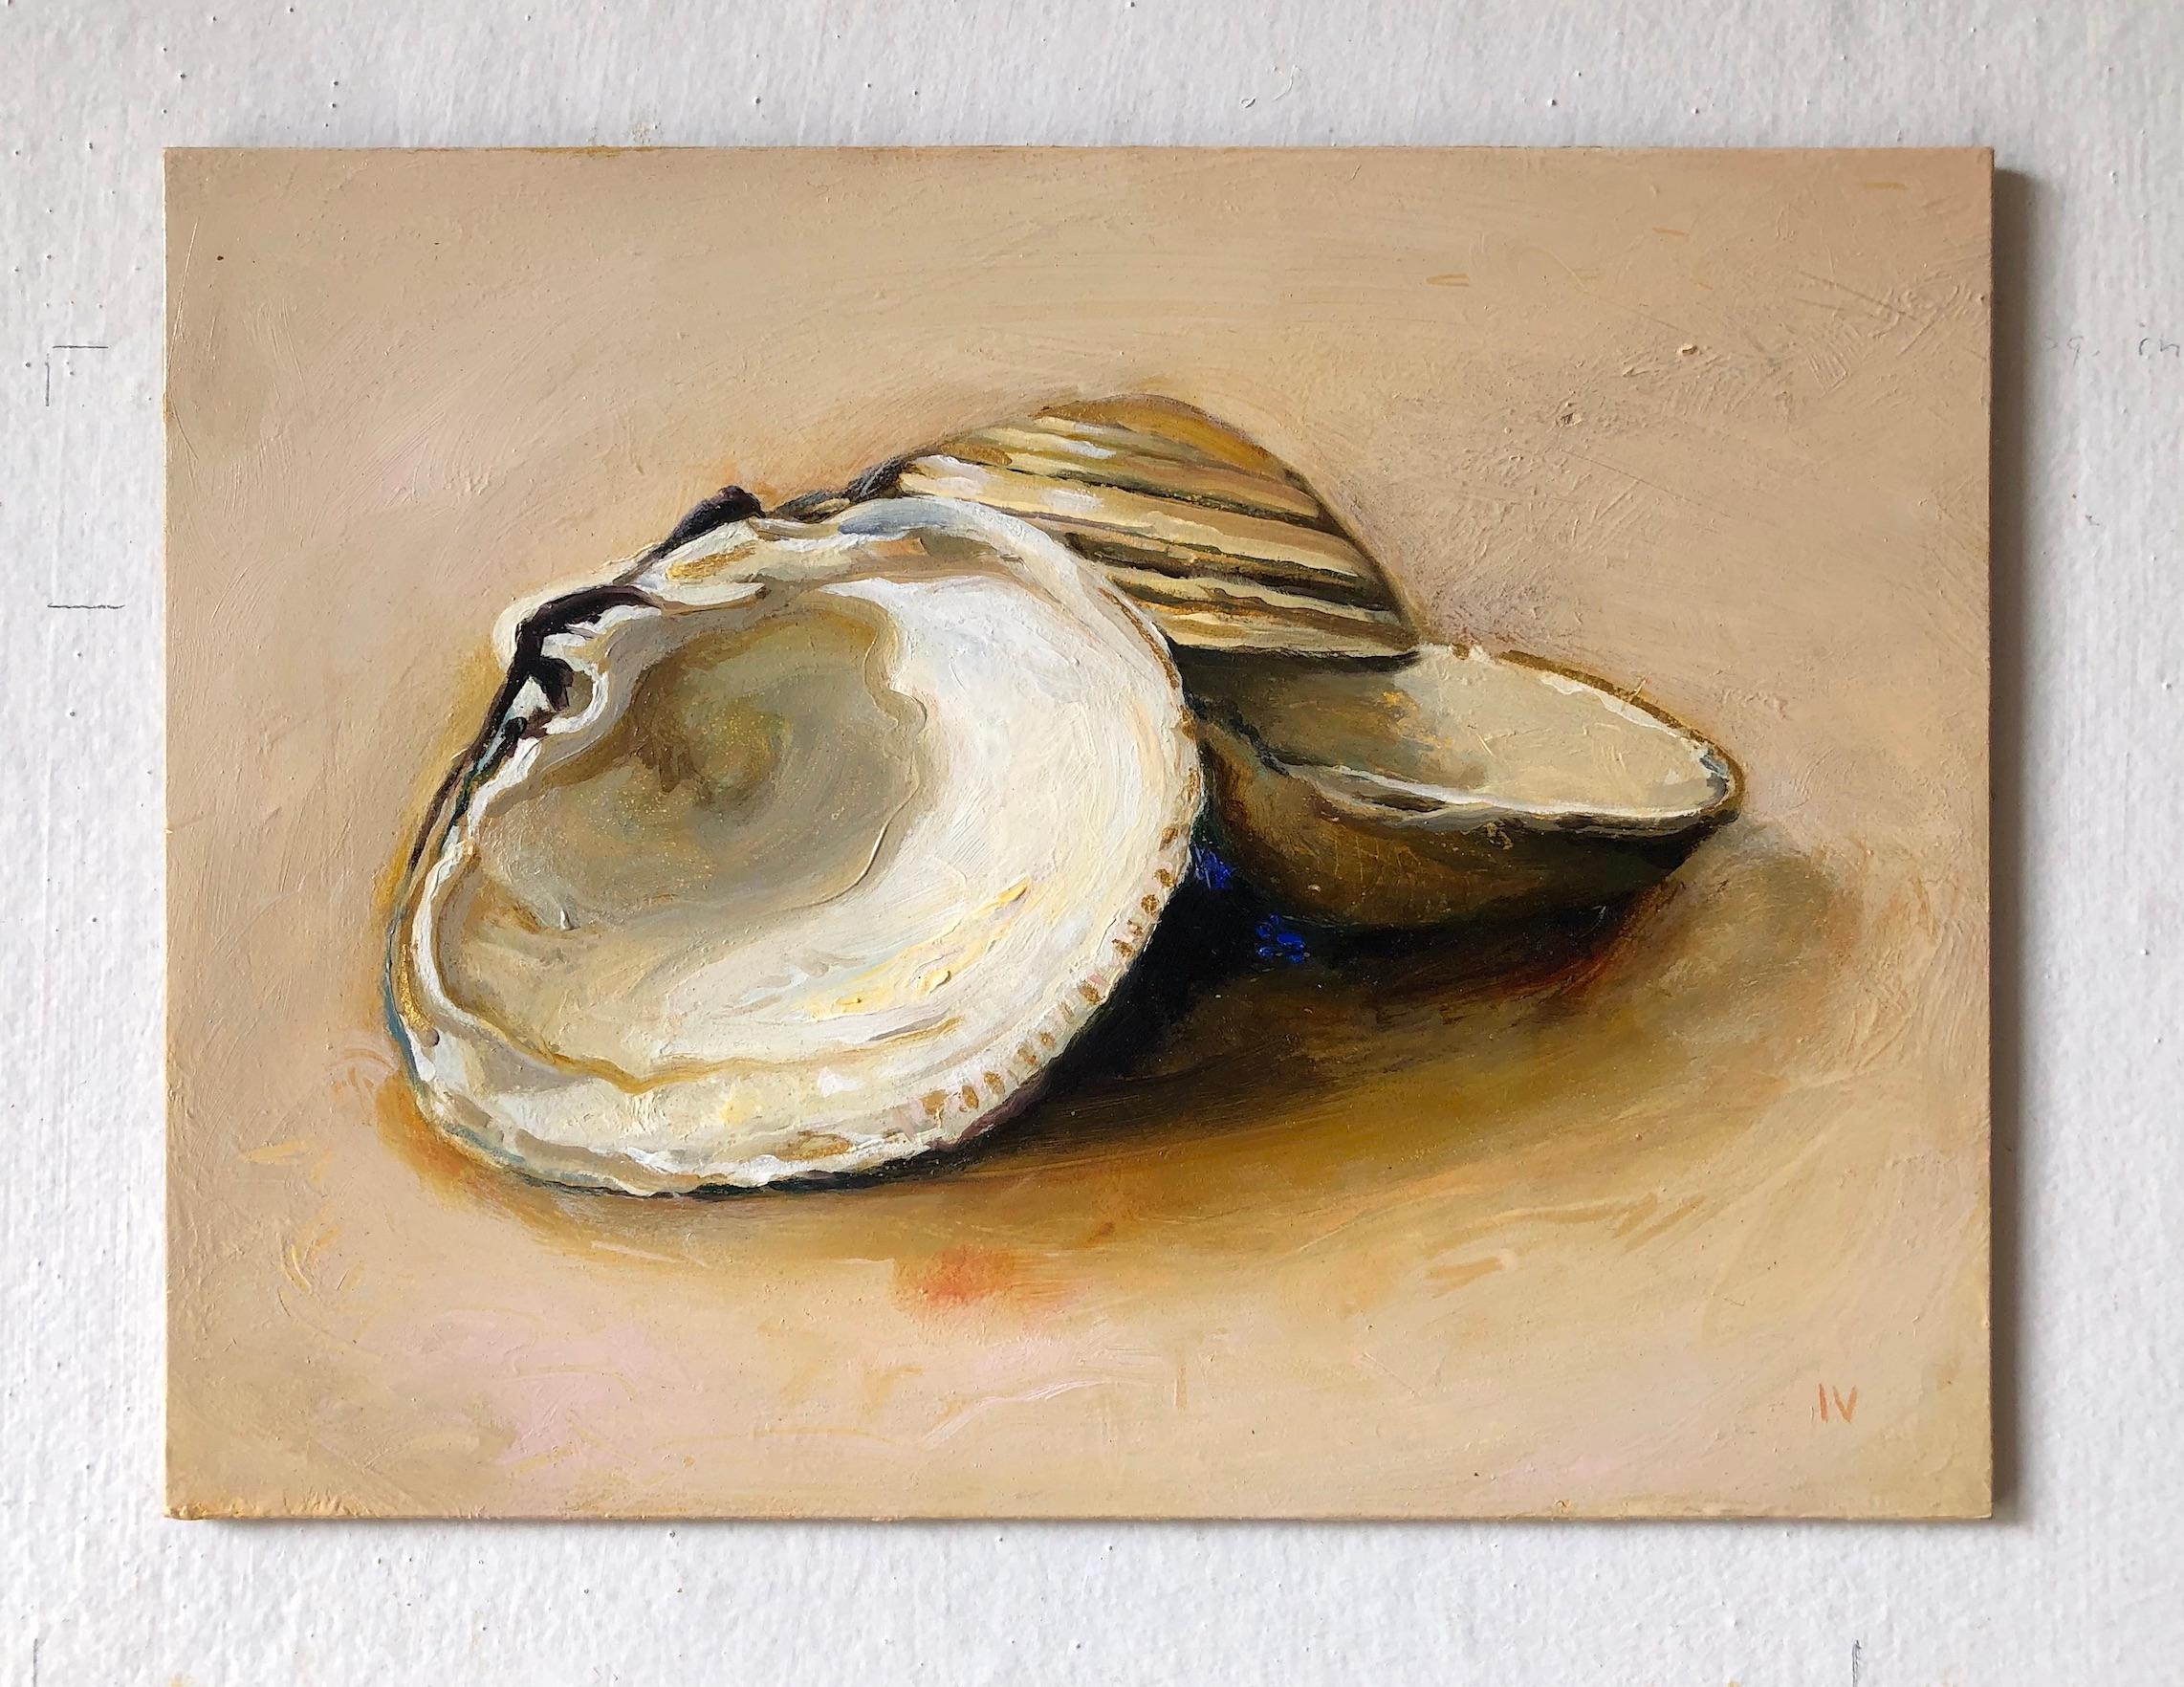 painted clam shells